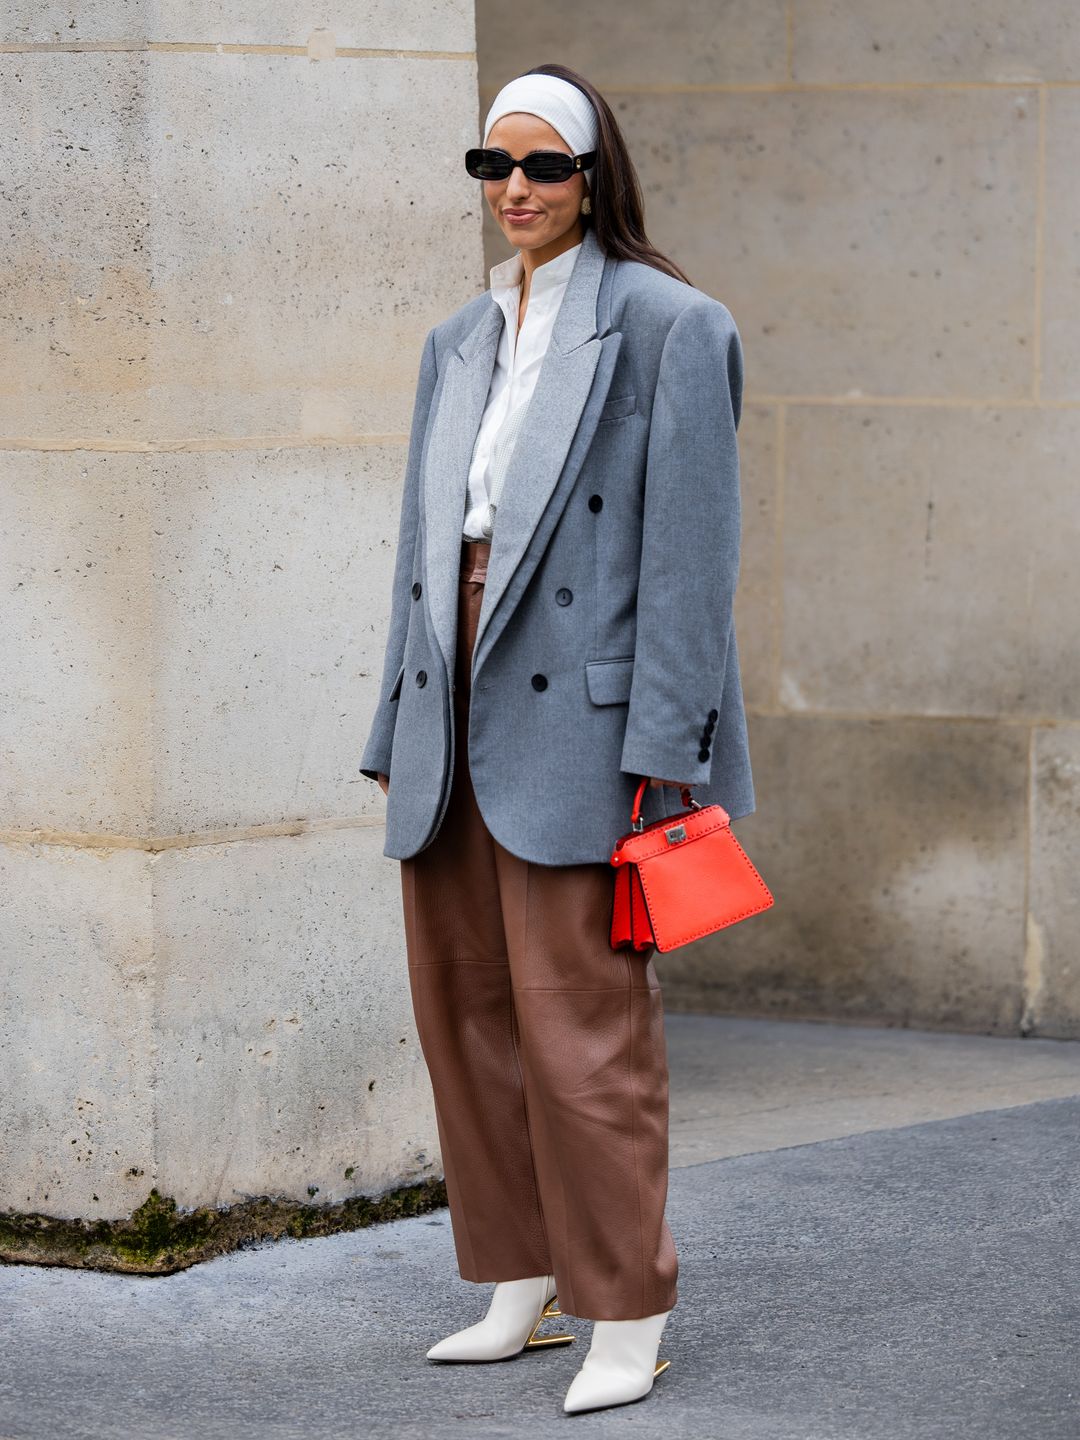 Bettina Looney wears white head band, brown pants, grey oversized blazer, red bag, white blouse outside Fendi during the Haute Couture 